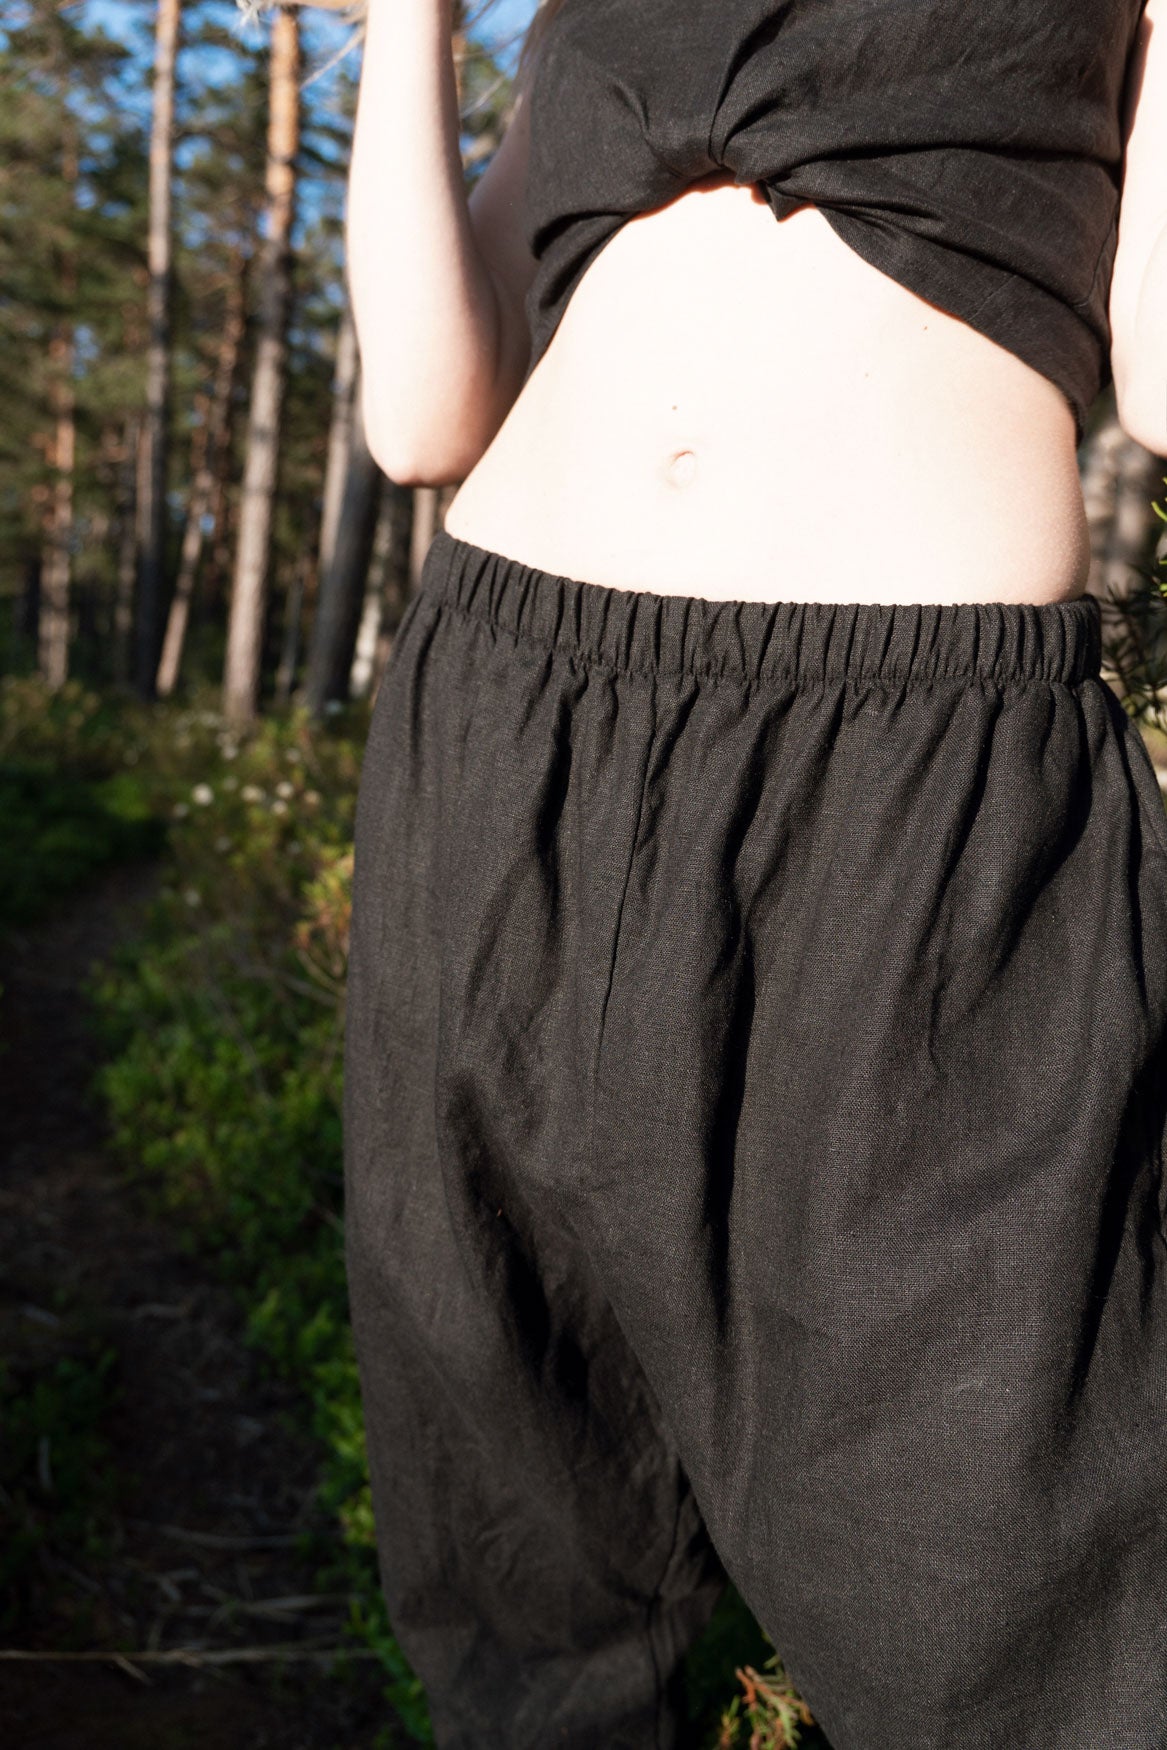 Organic, sustainable black linen pants and top that can be worn as a loungewear, pajamas or sweatpants with a top. These pants are natural, comfortable, soft and pure. These pants are a conscious and healthy choice for your body and environment. Handmade in the North.